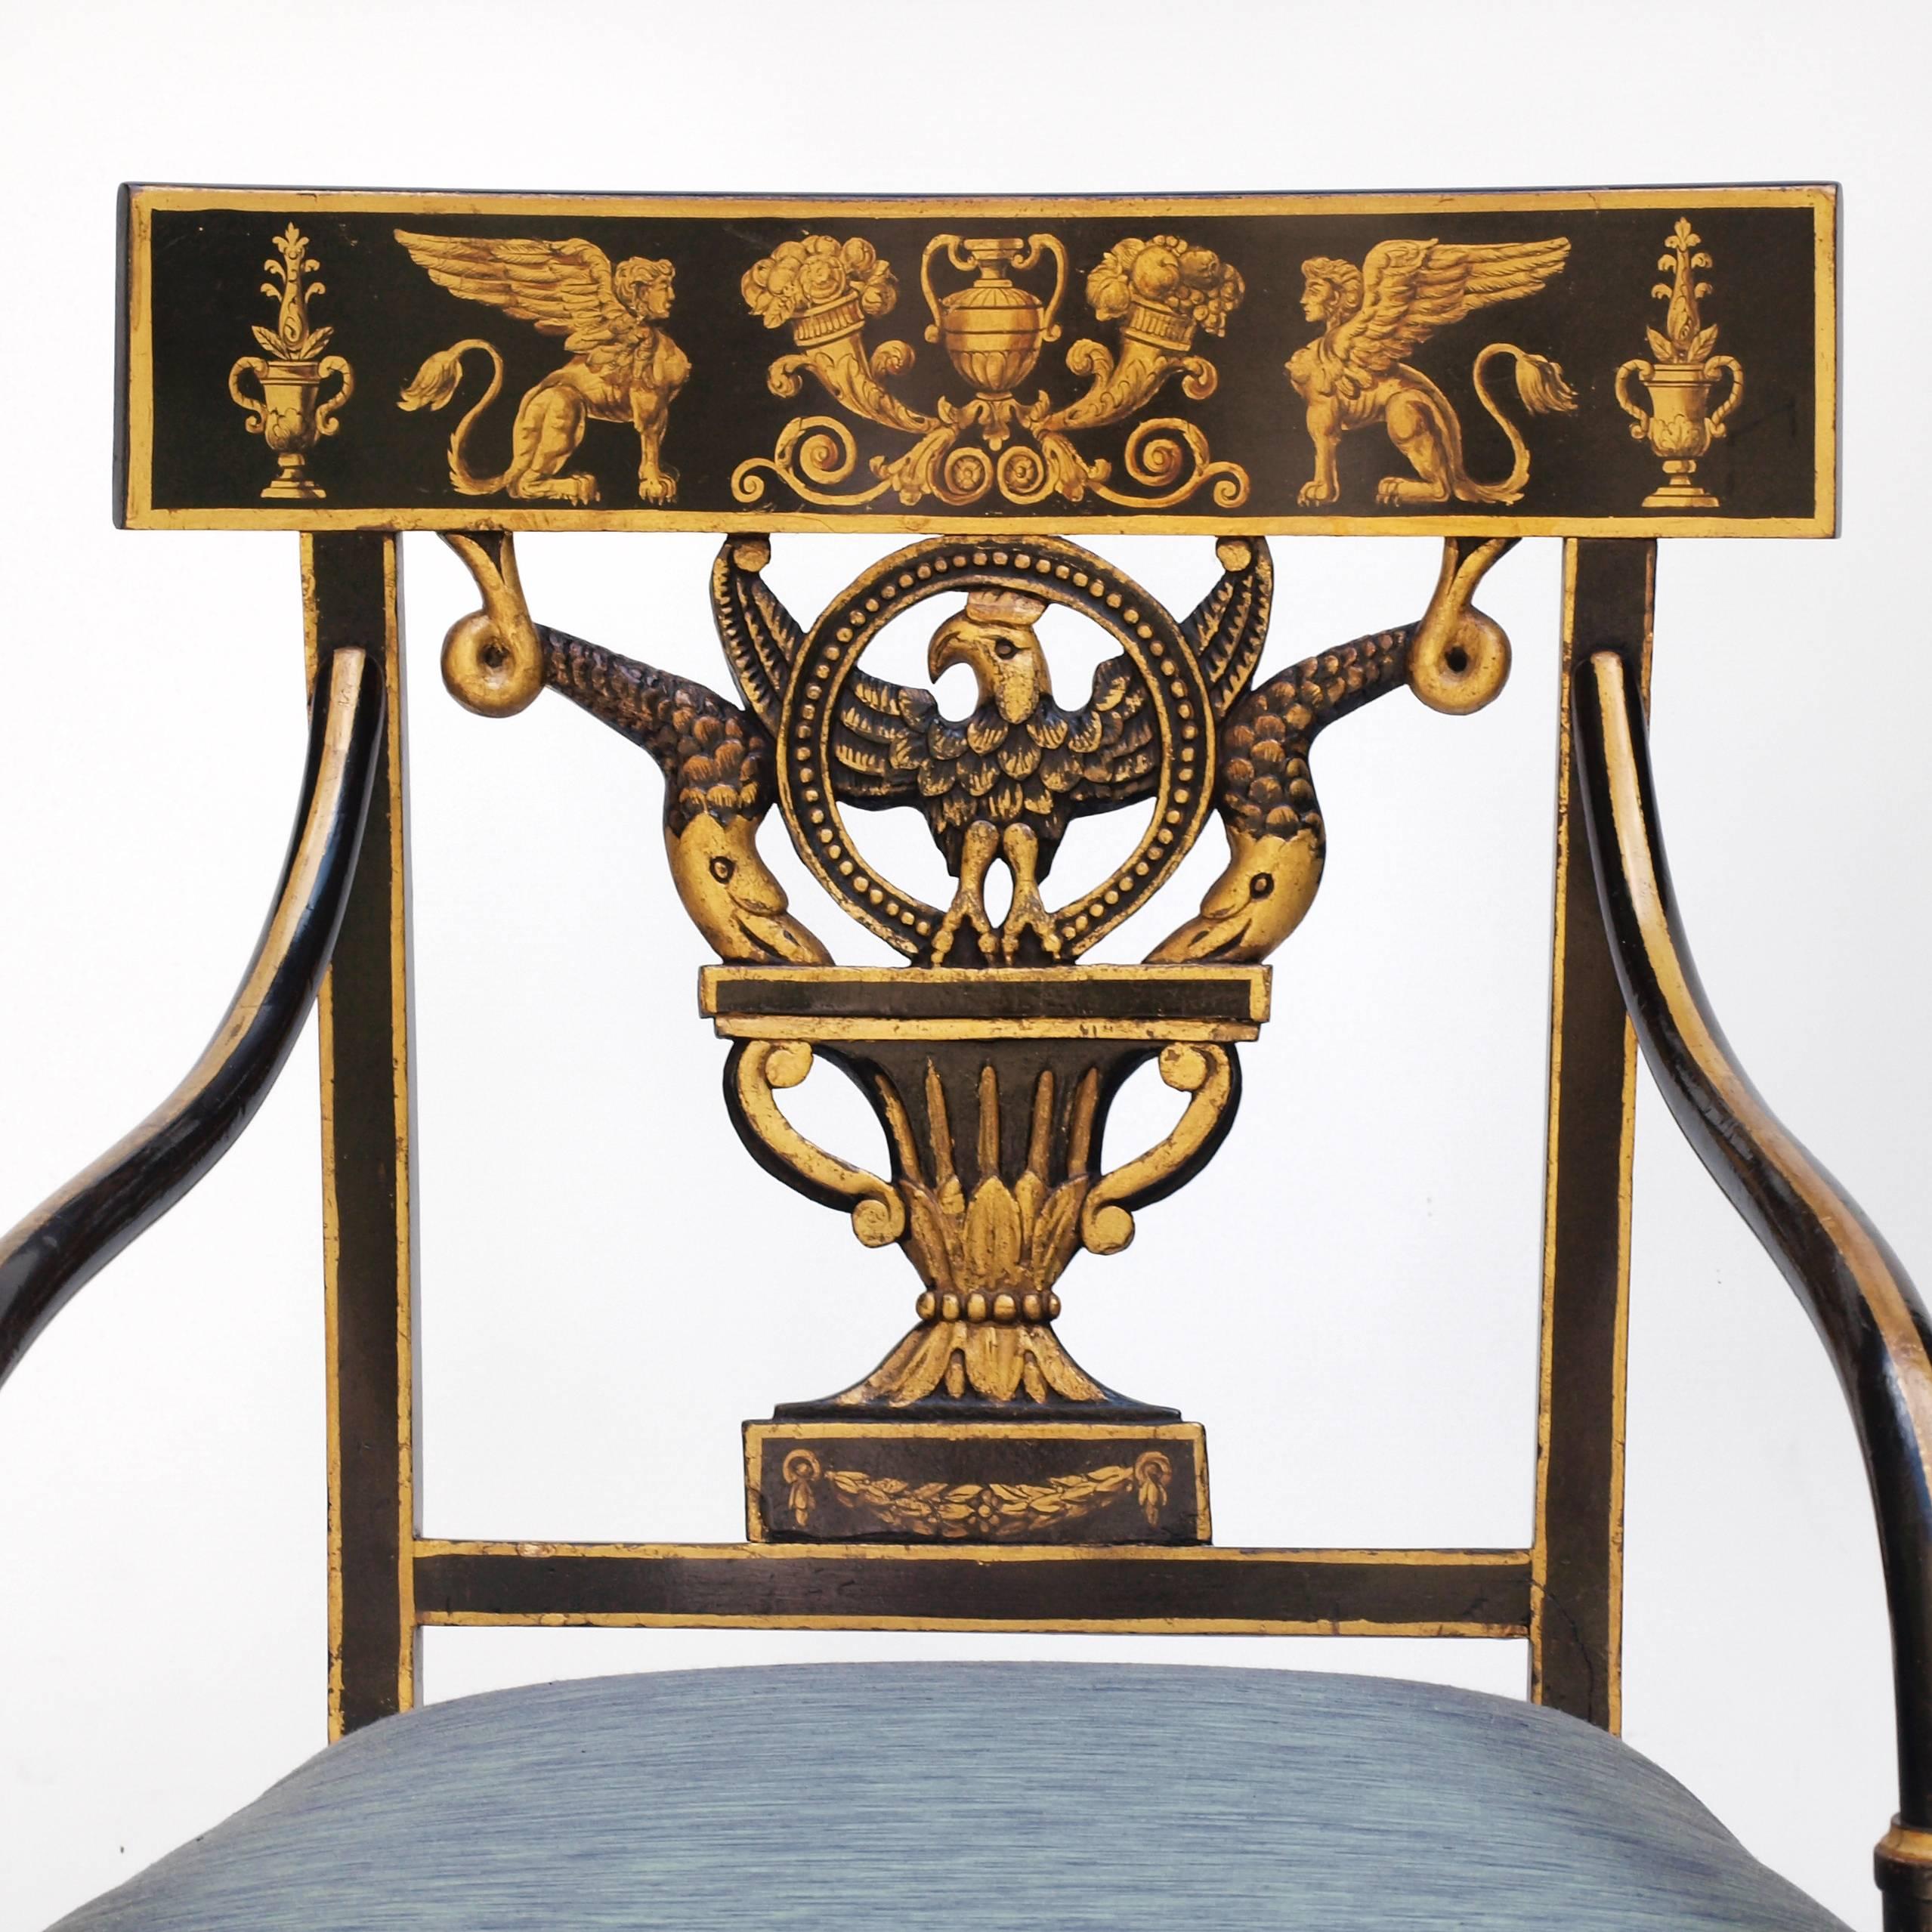 An early 19th century American armchair. The chair is designed in a regency style with a curved tablet back and open carving leading to gently sloping legs. Bentwood arms connect the back to the front legs, supporting a wide upholstered seat. The